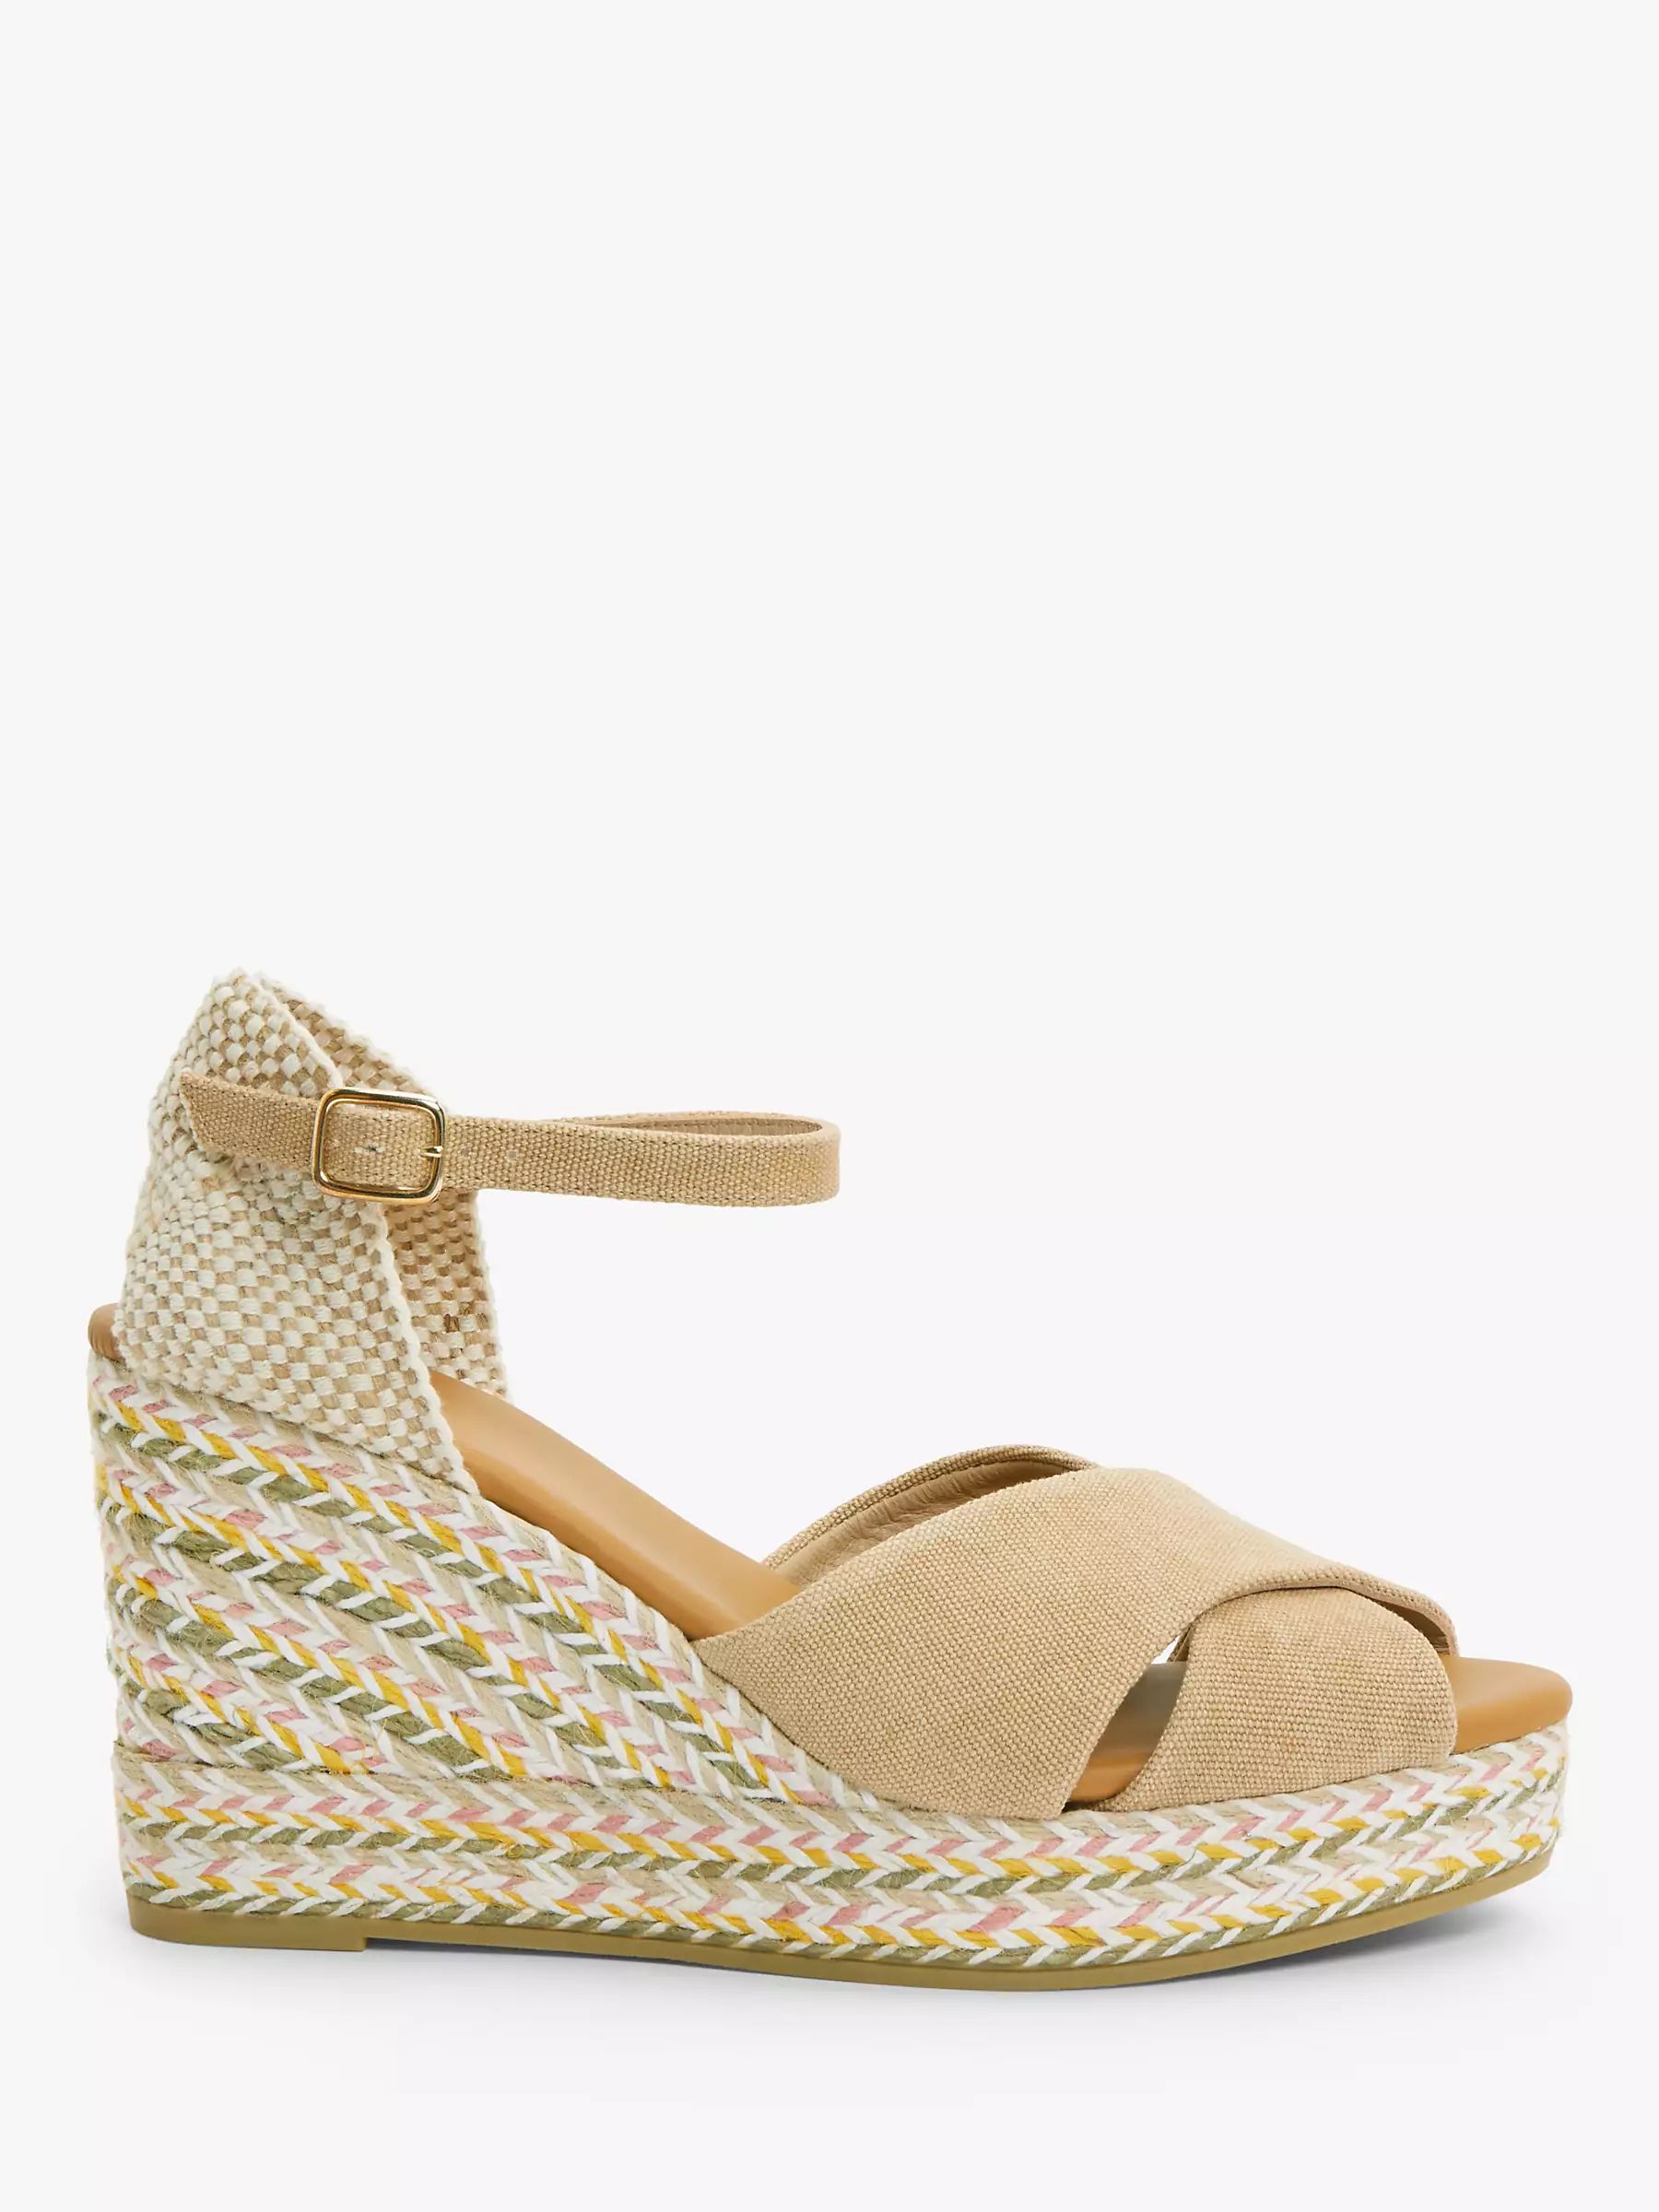 AND/OR Kendall Canvas Multi Colour Jute Wedge Espadrille Sandals, Beige | John Lewis (UK)